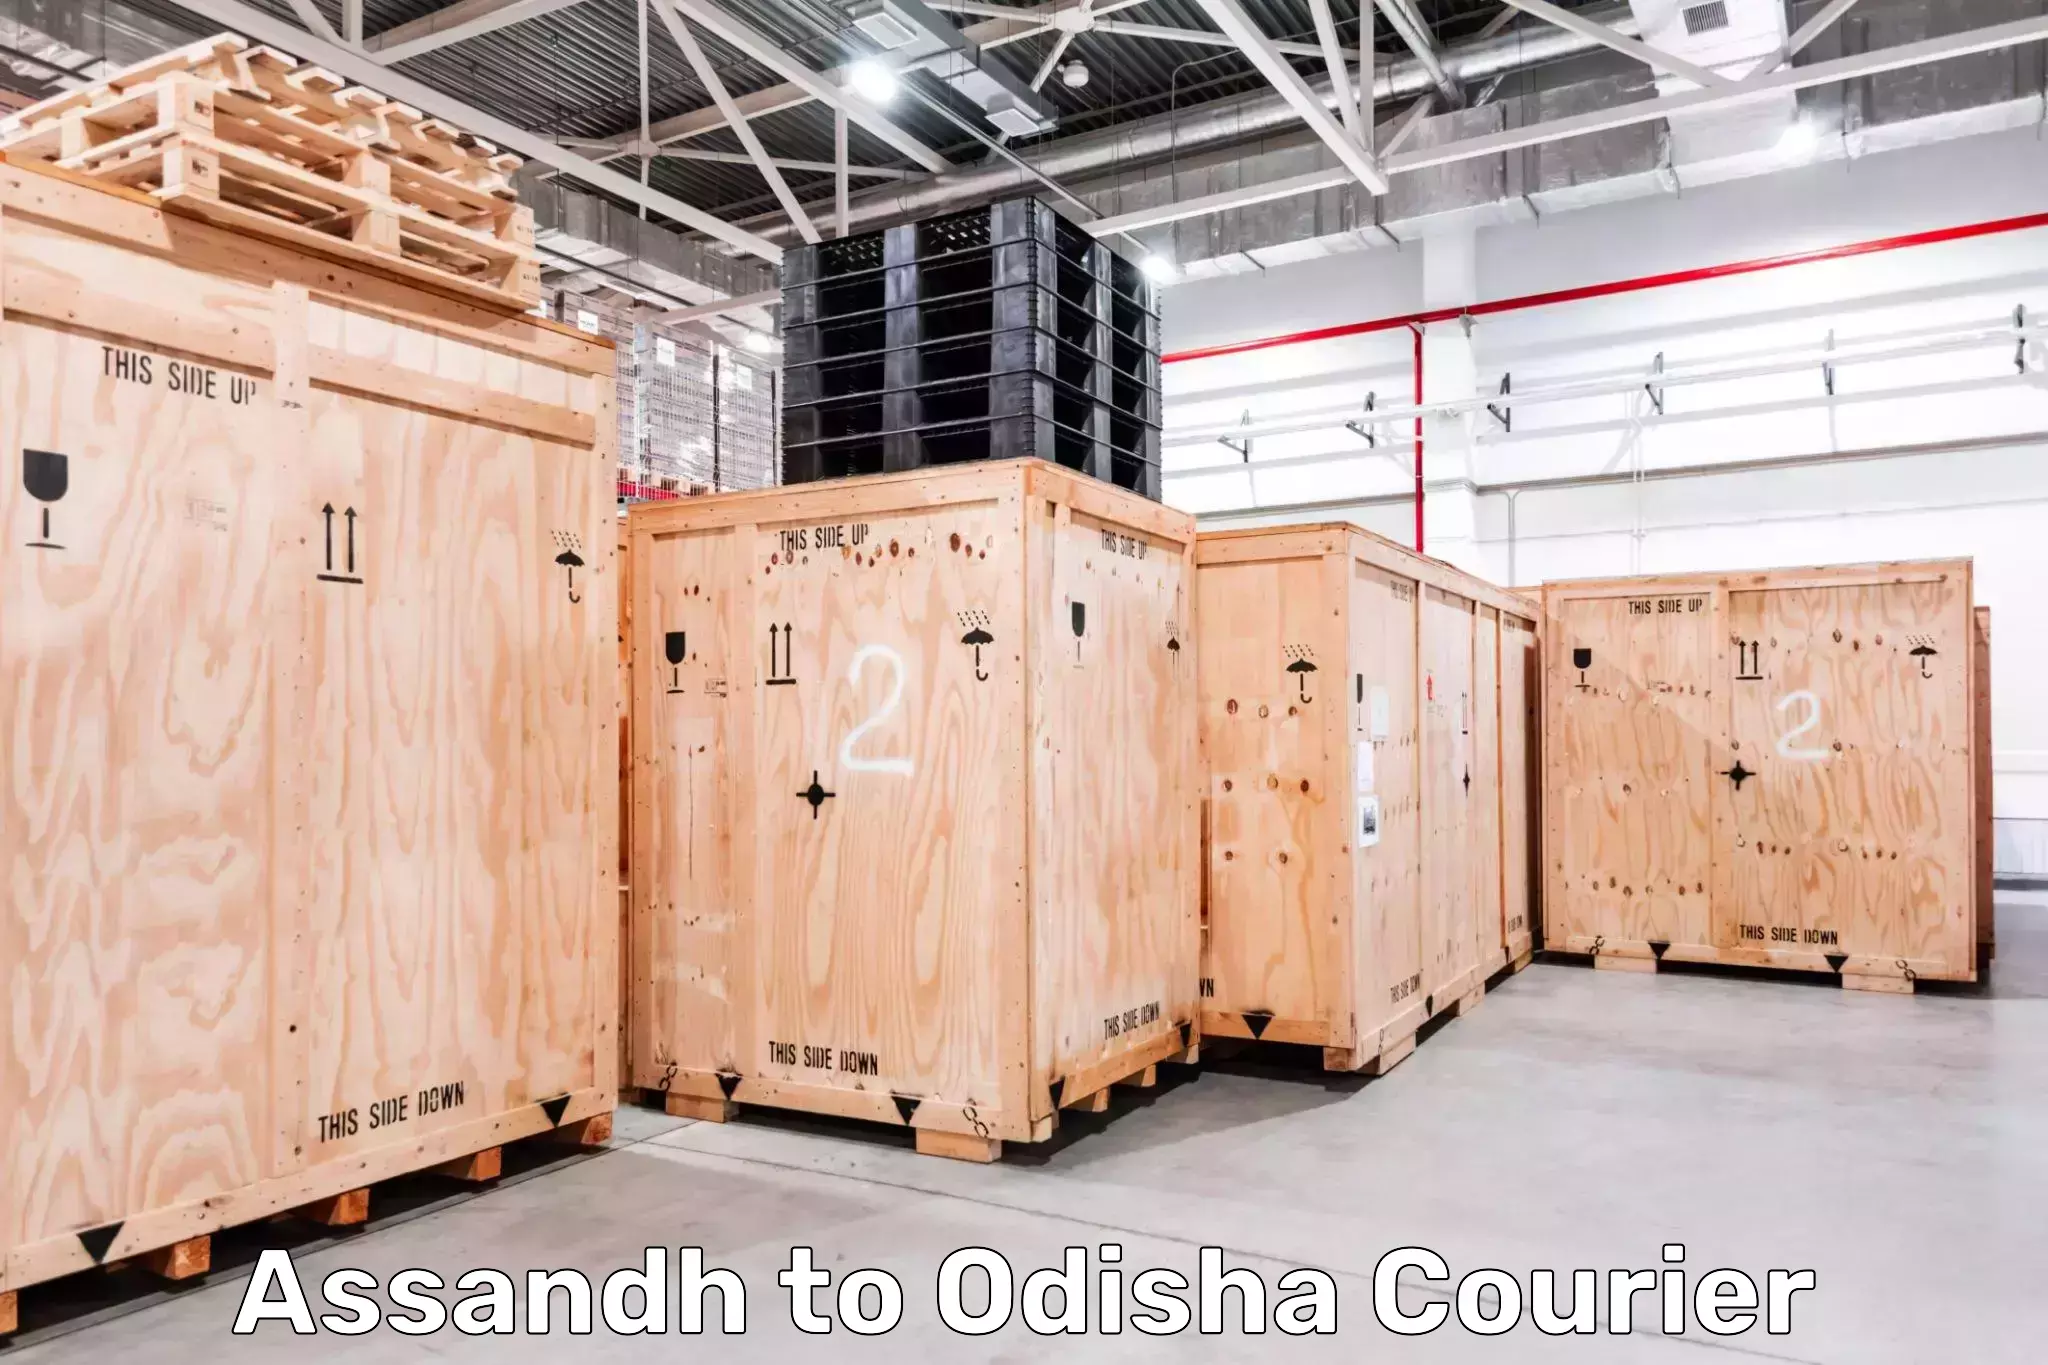 Seamless shipping experience Assandh to Odisha